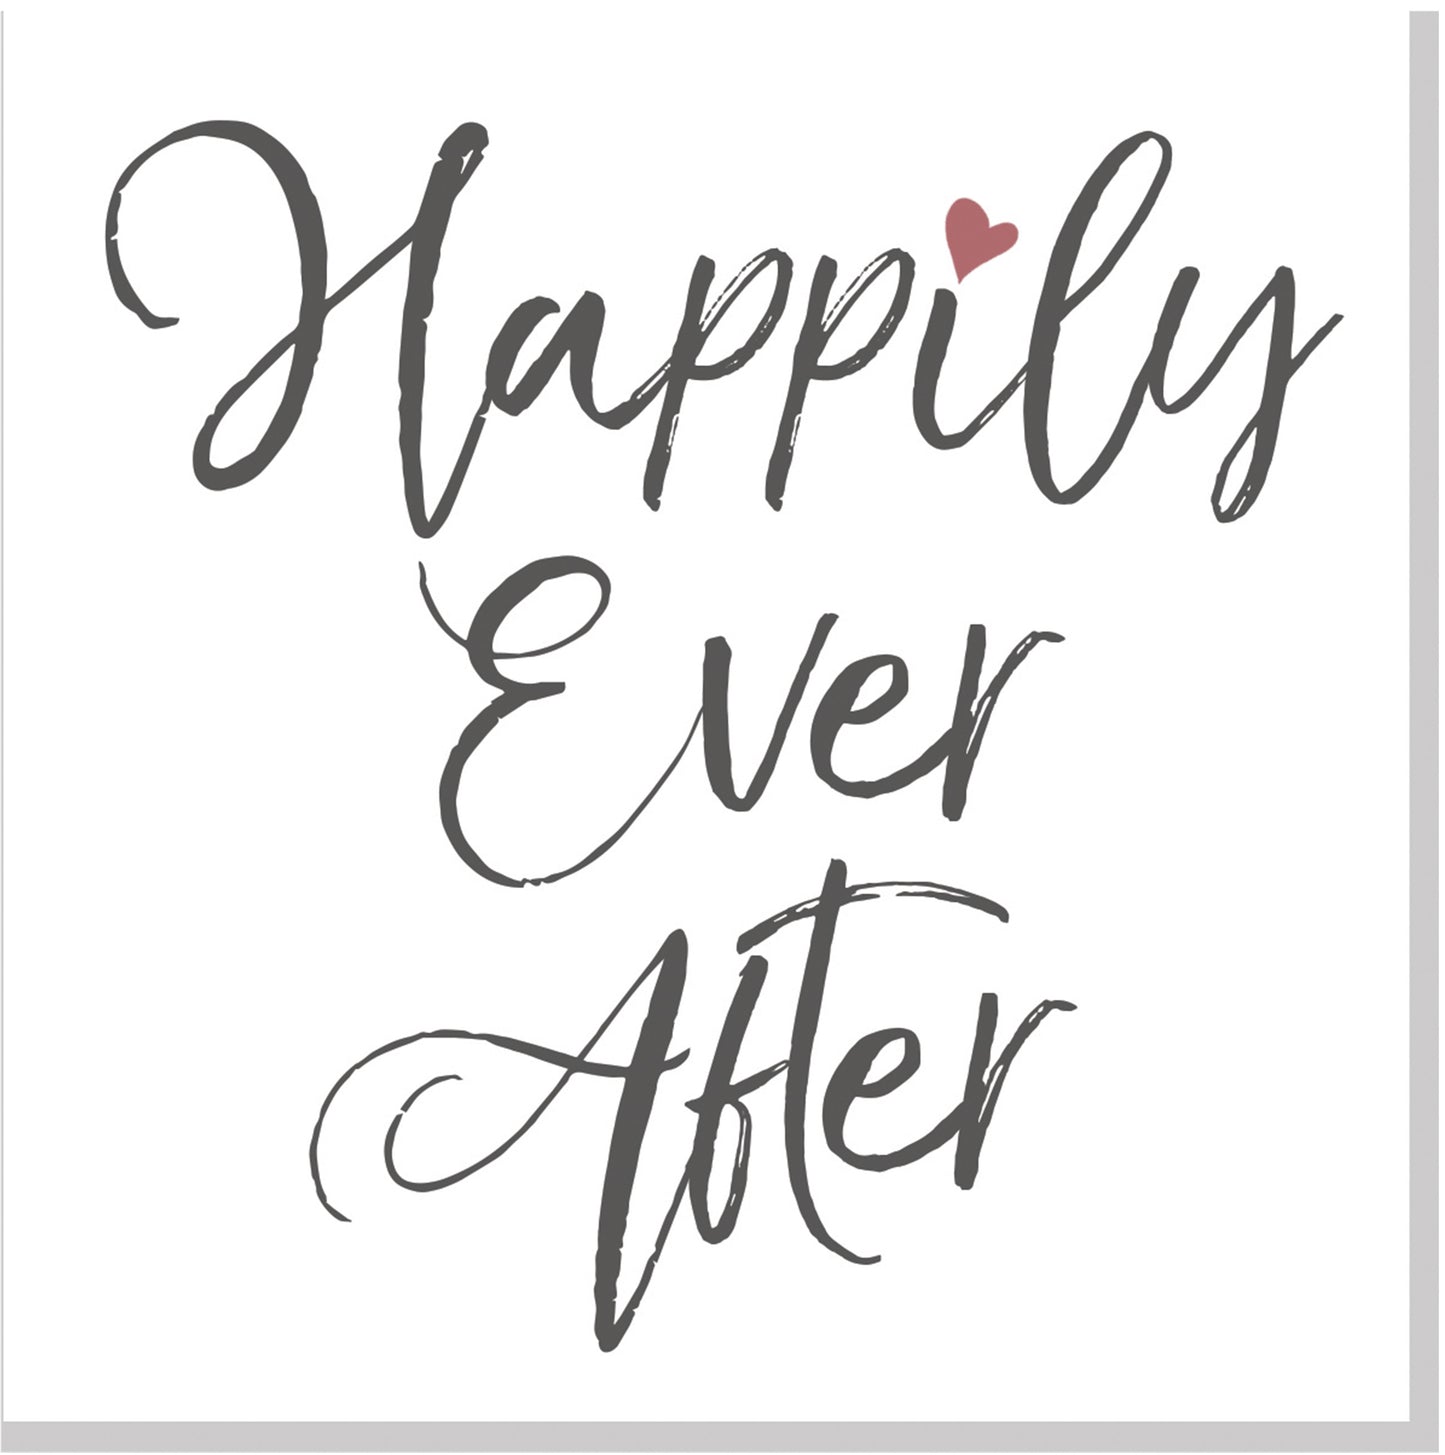 Wedding Happily Ever After square card